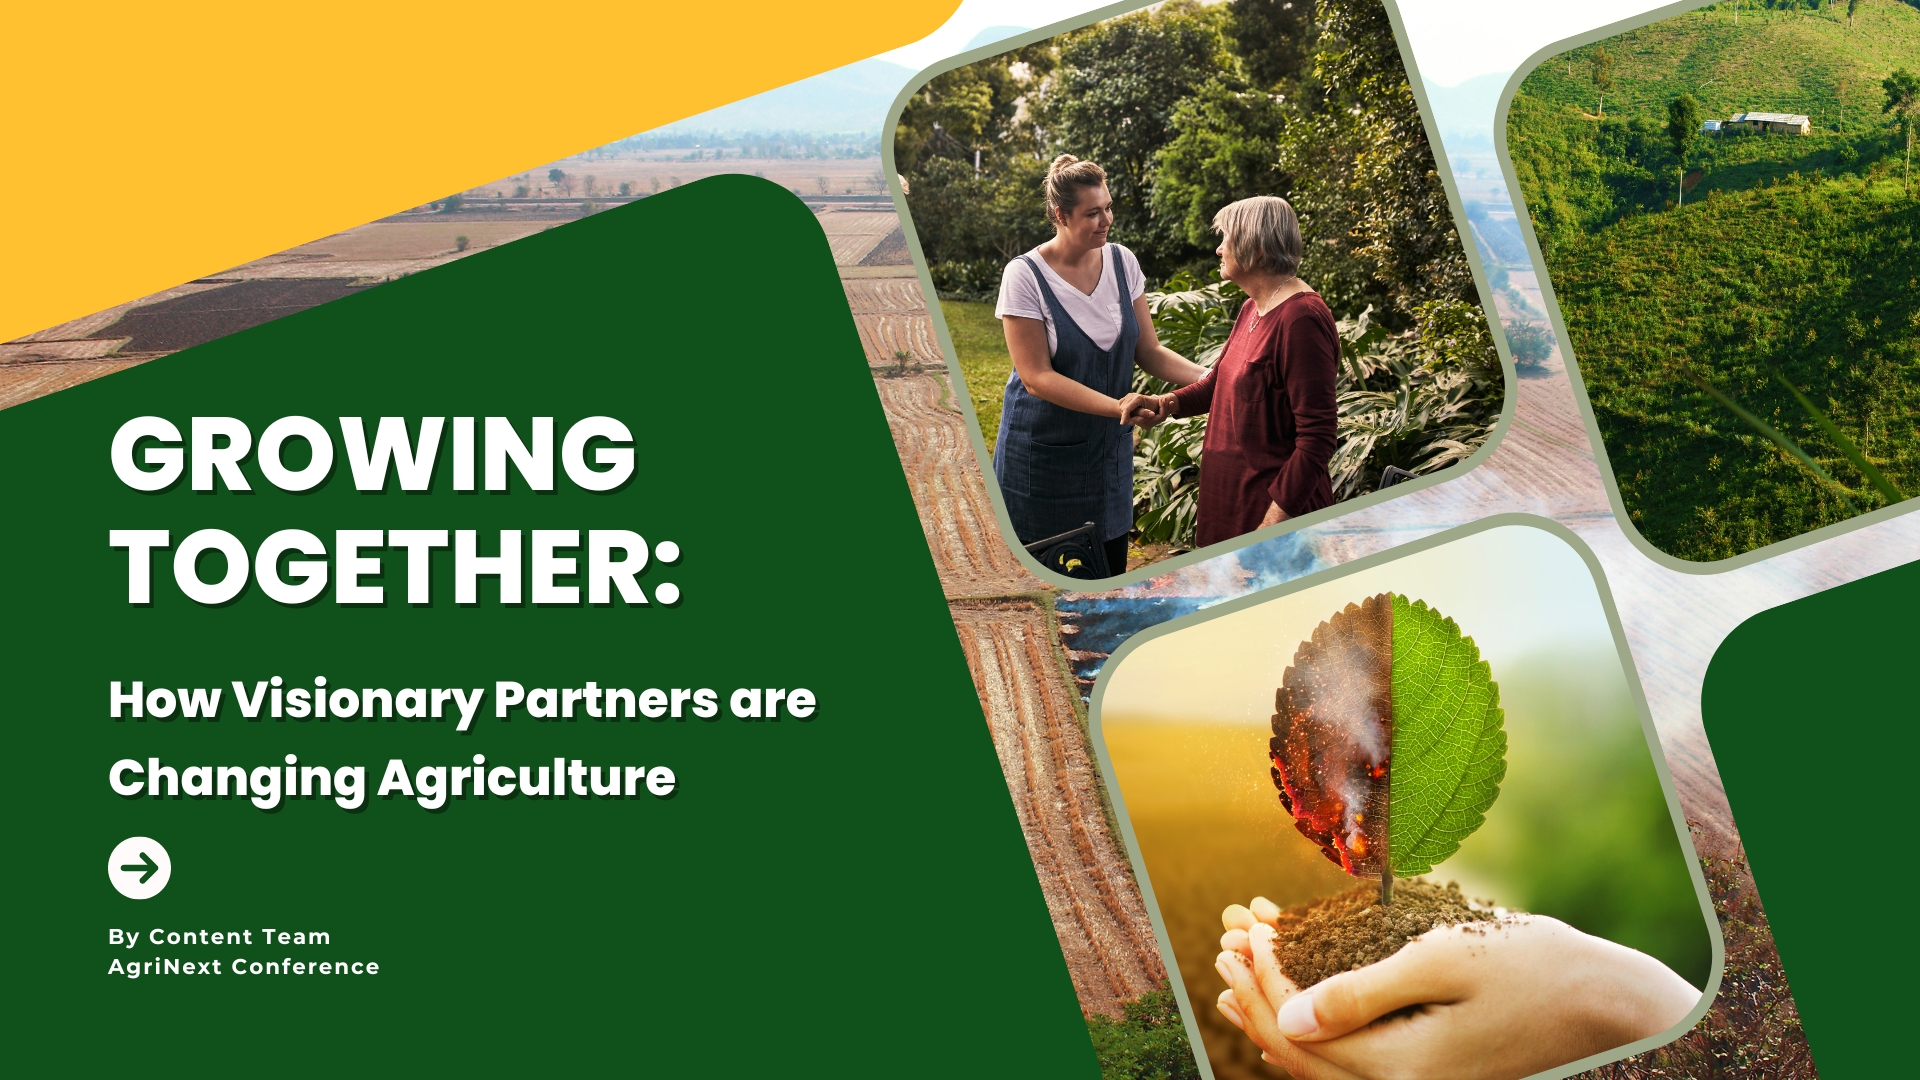 Growing Together: How Visionary Innovation Partners are Changing Agriculture